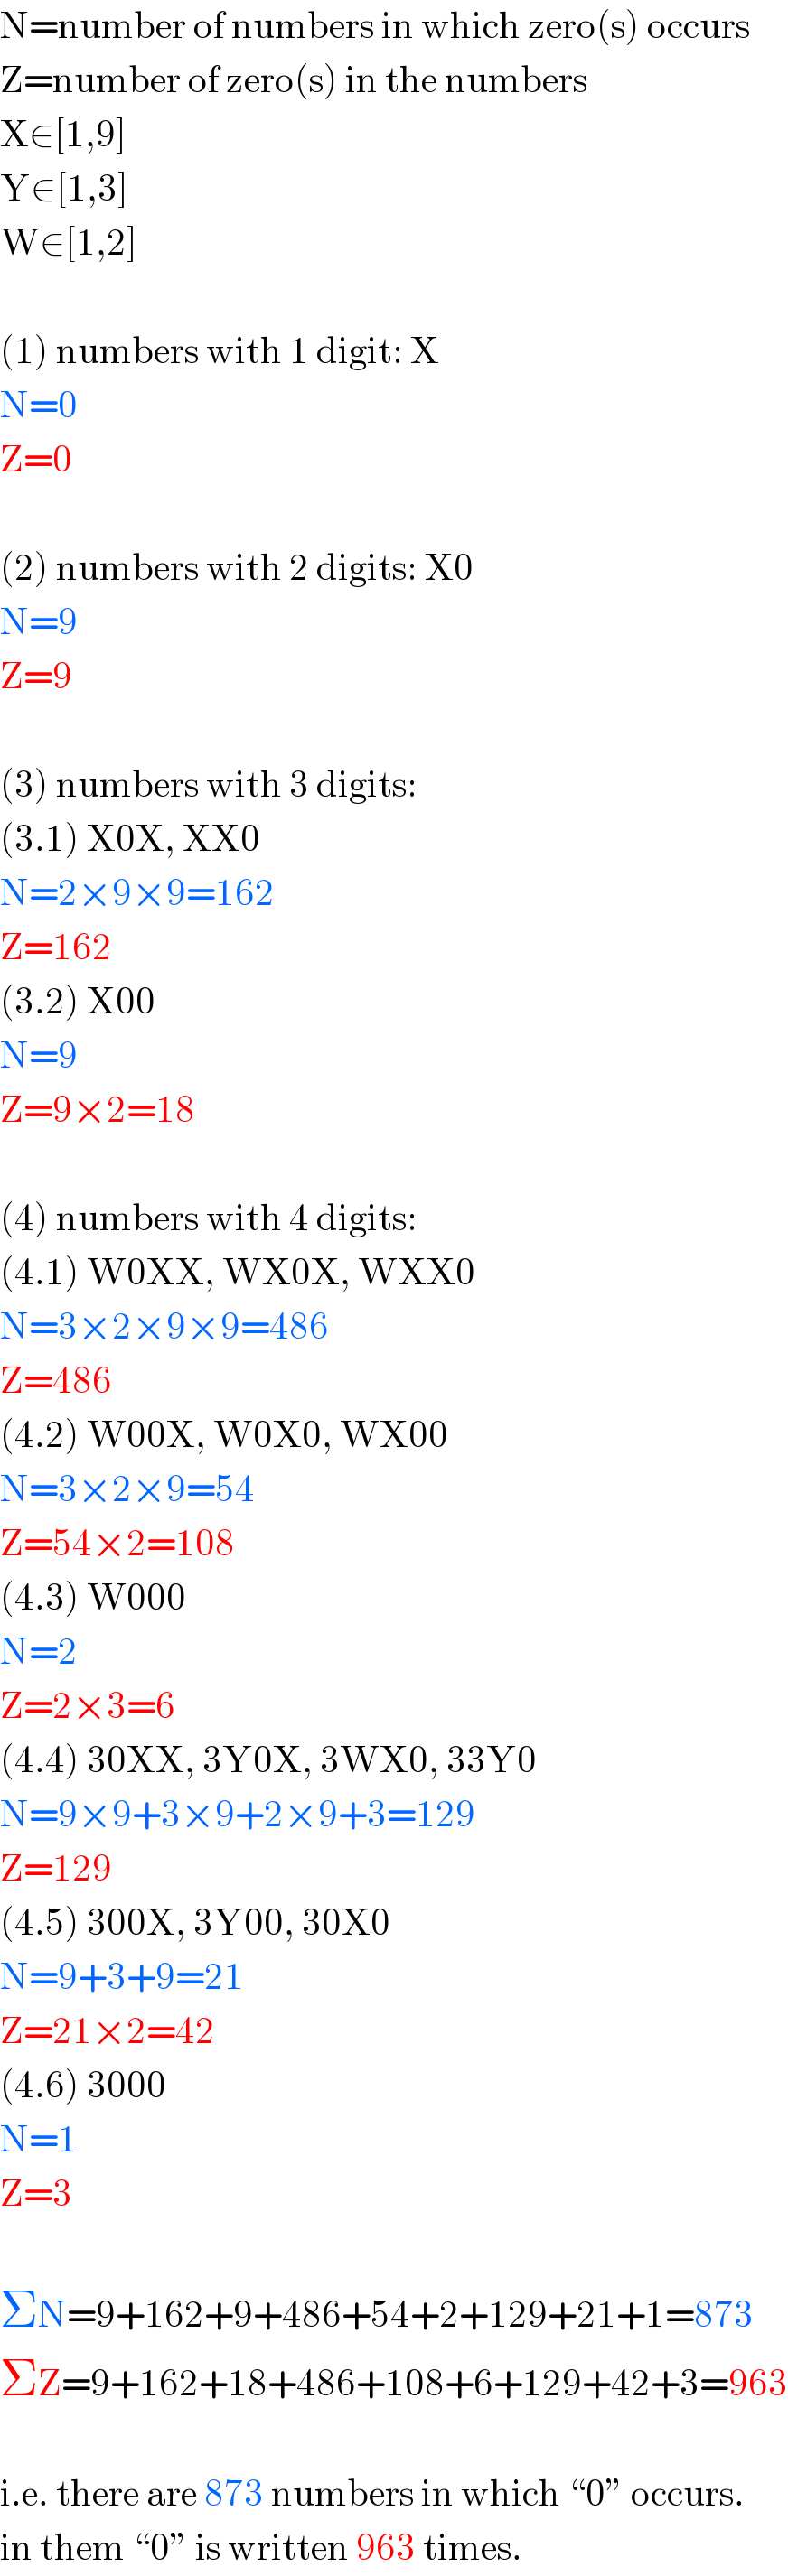 N=number of numbers in which zero(s) occurs  Z=number of zero(s) in the numbers  X∈[1,9]  Y∈[1,3]  W∈[1,2]    (1) numbers with 1 digit: X  N=0  Z=0    (2) numbers with 2 digits: X0  N=9  Z=9    (3) numbers with 3 digits:   (3.1) X0X, XX0  N=2×9×9=162  Z=162  (3.2) X00  N=9  Z=9×2=18    (4) numbers with 4 digits:   (4.1) W0XX, WX0X, WXX0  N=3×2×9×9=486  Z=486  (4.2) W00X, W0X0, WX00  N=3×2×9=54  Z=54×2=108  (4.3) W000  N=2  Z=2×3=6  (4.4) 30XX, 3Y0X, 3WX0, 33Y0  N=9×9+3×9+2×9+3=129  Z=129  (4.5) 300X, 3Y00, 30X0  N=9+3+9=21  Z=21×2=42  (4.6) 3000  N=1  Z=3    ΣN=9+162+9+486+54+2+129+21+1=873  ΣZ=9+162+18+486+108+6+129+42+3=963    i.e. there are 873 numbers in which “0” occurs.  in them “0” is written 963 times.  